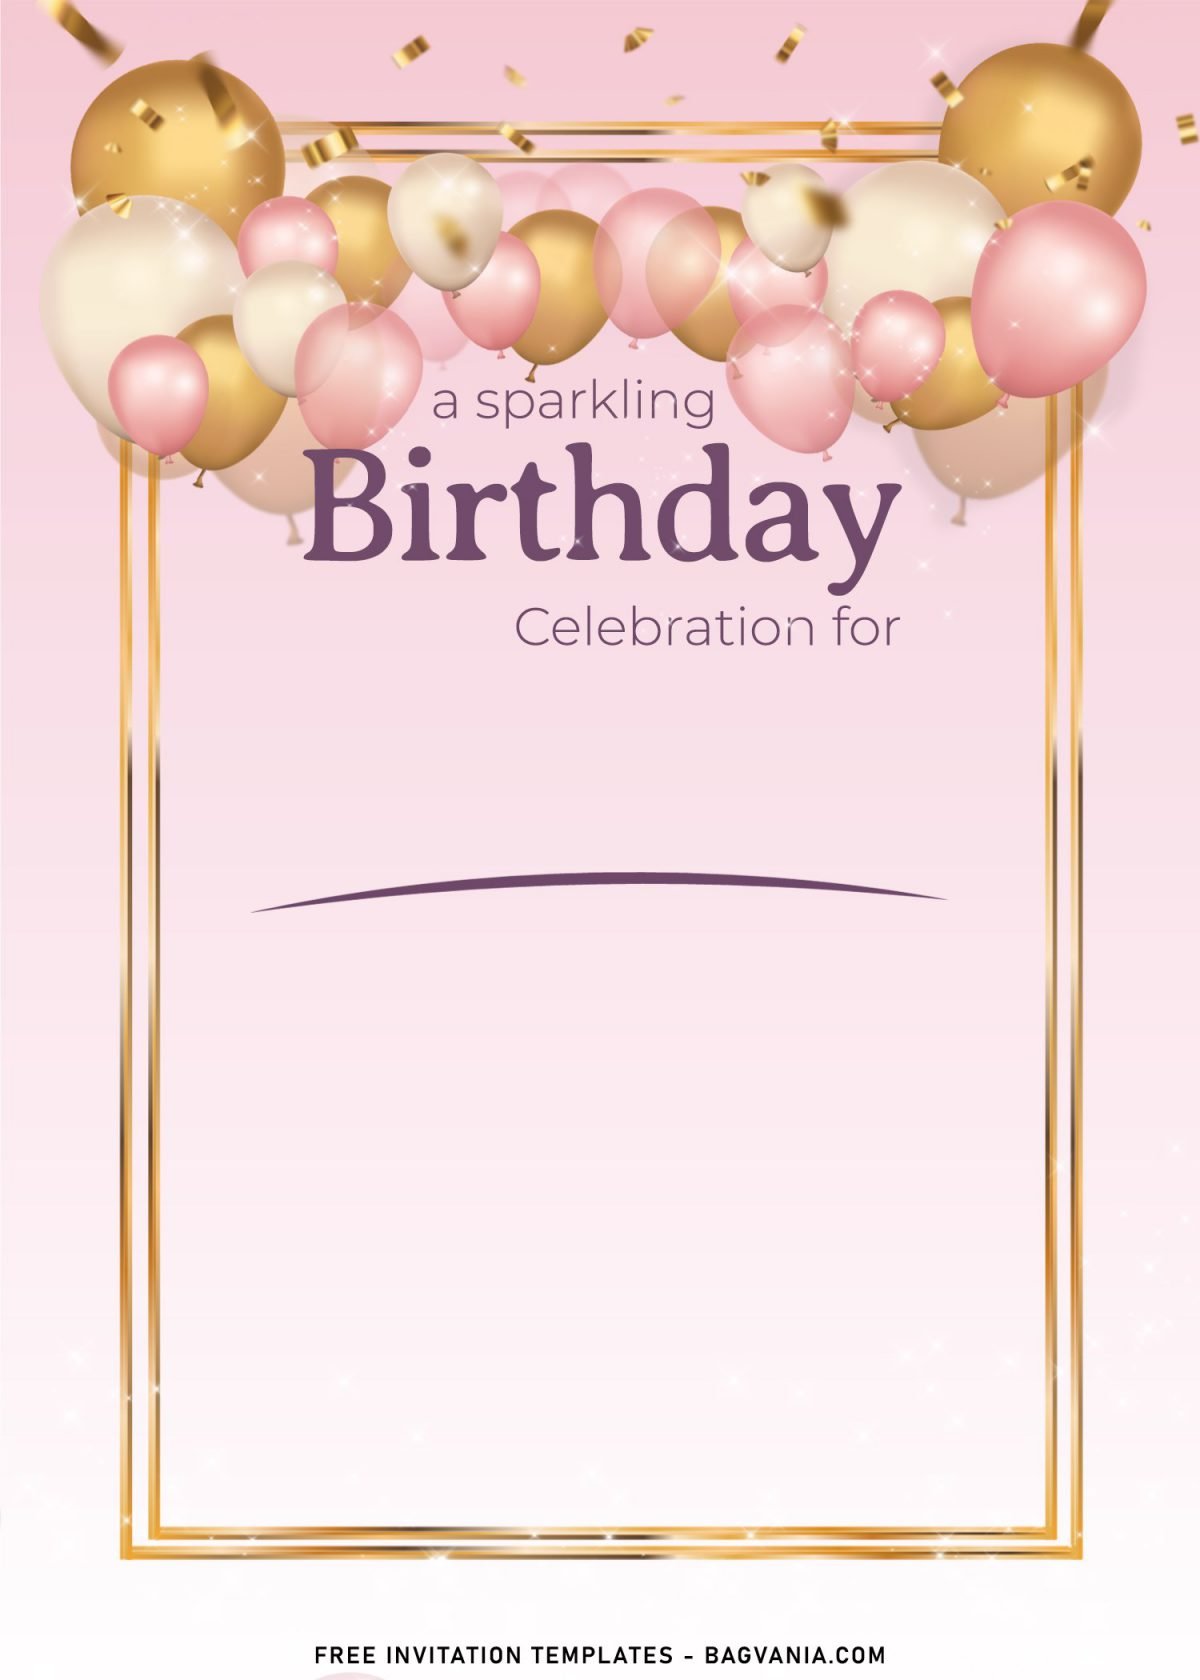 10+ Sparkling Balloons Birthday Invitation Templates Suitable For All Ages with blush pink background